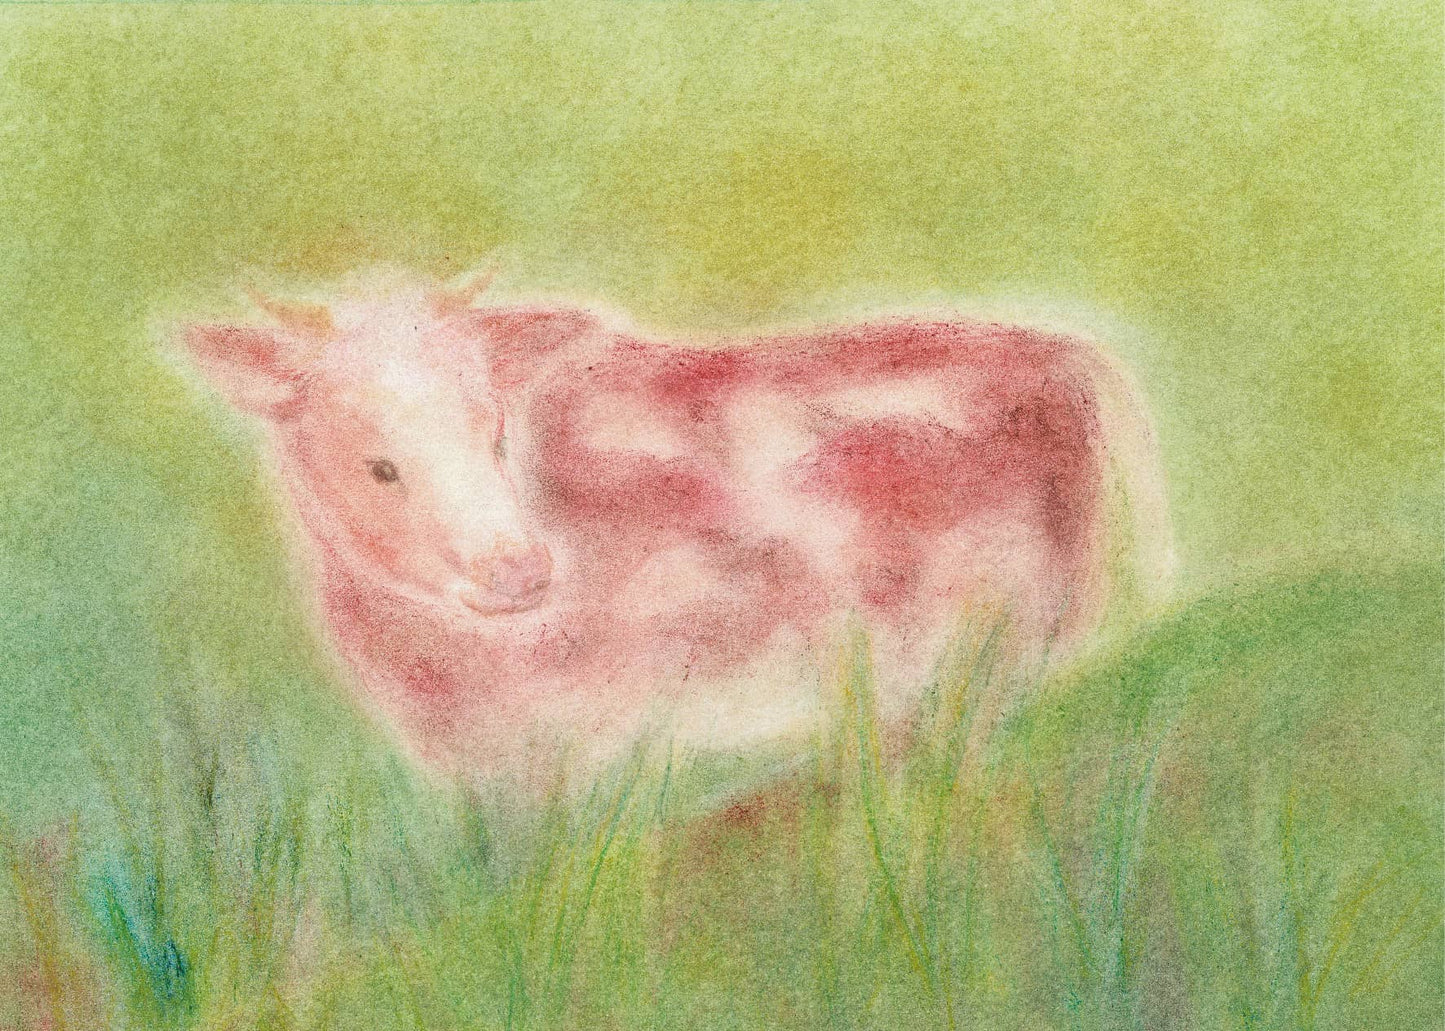 Seccorell postcard "Cow in the pasture" shows a peaceful cow surrounded by green nature.